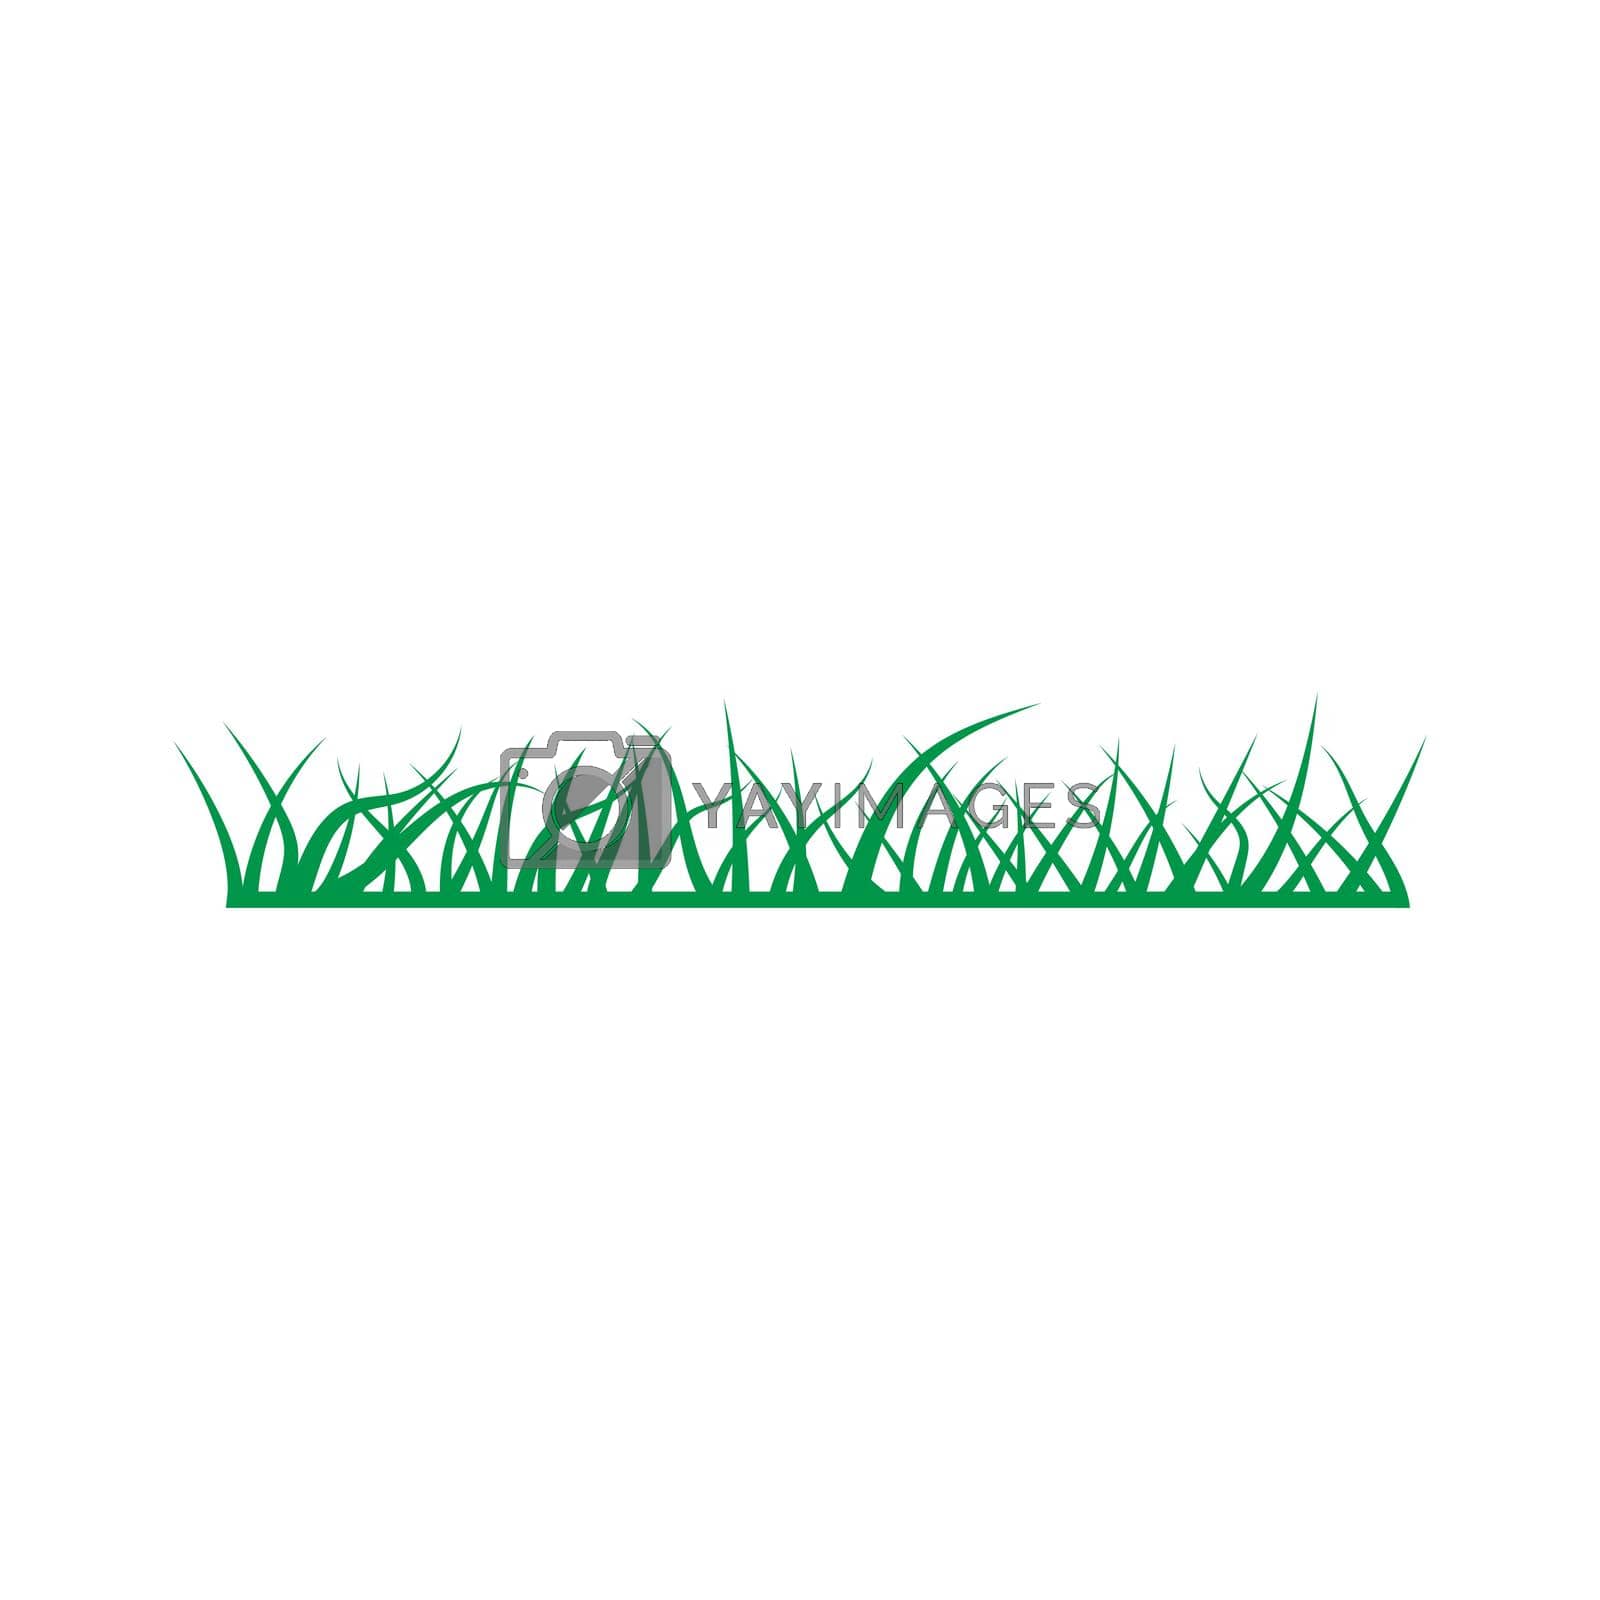 Royalty free image of Grass ilustration logo by awk